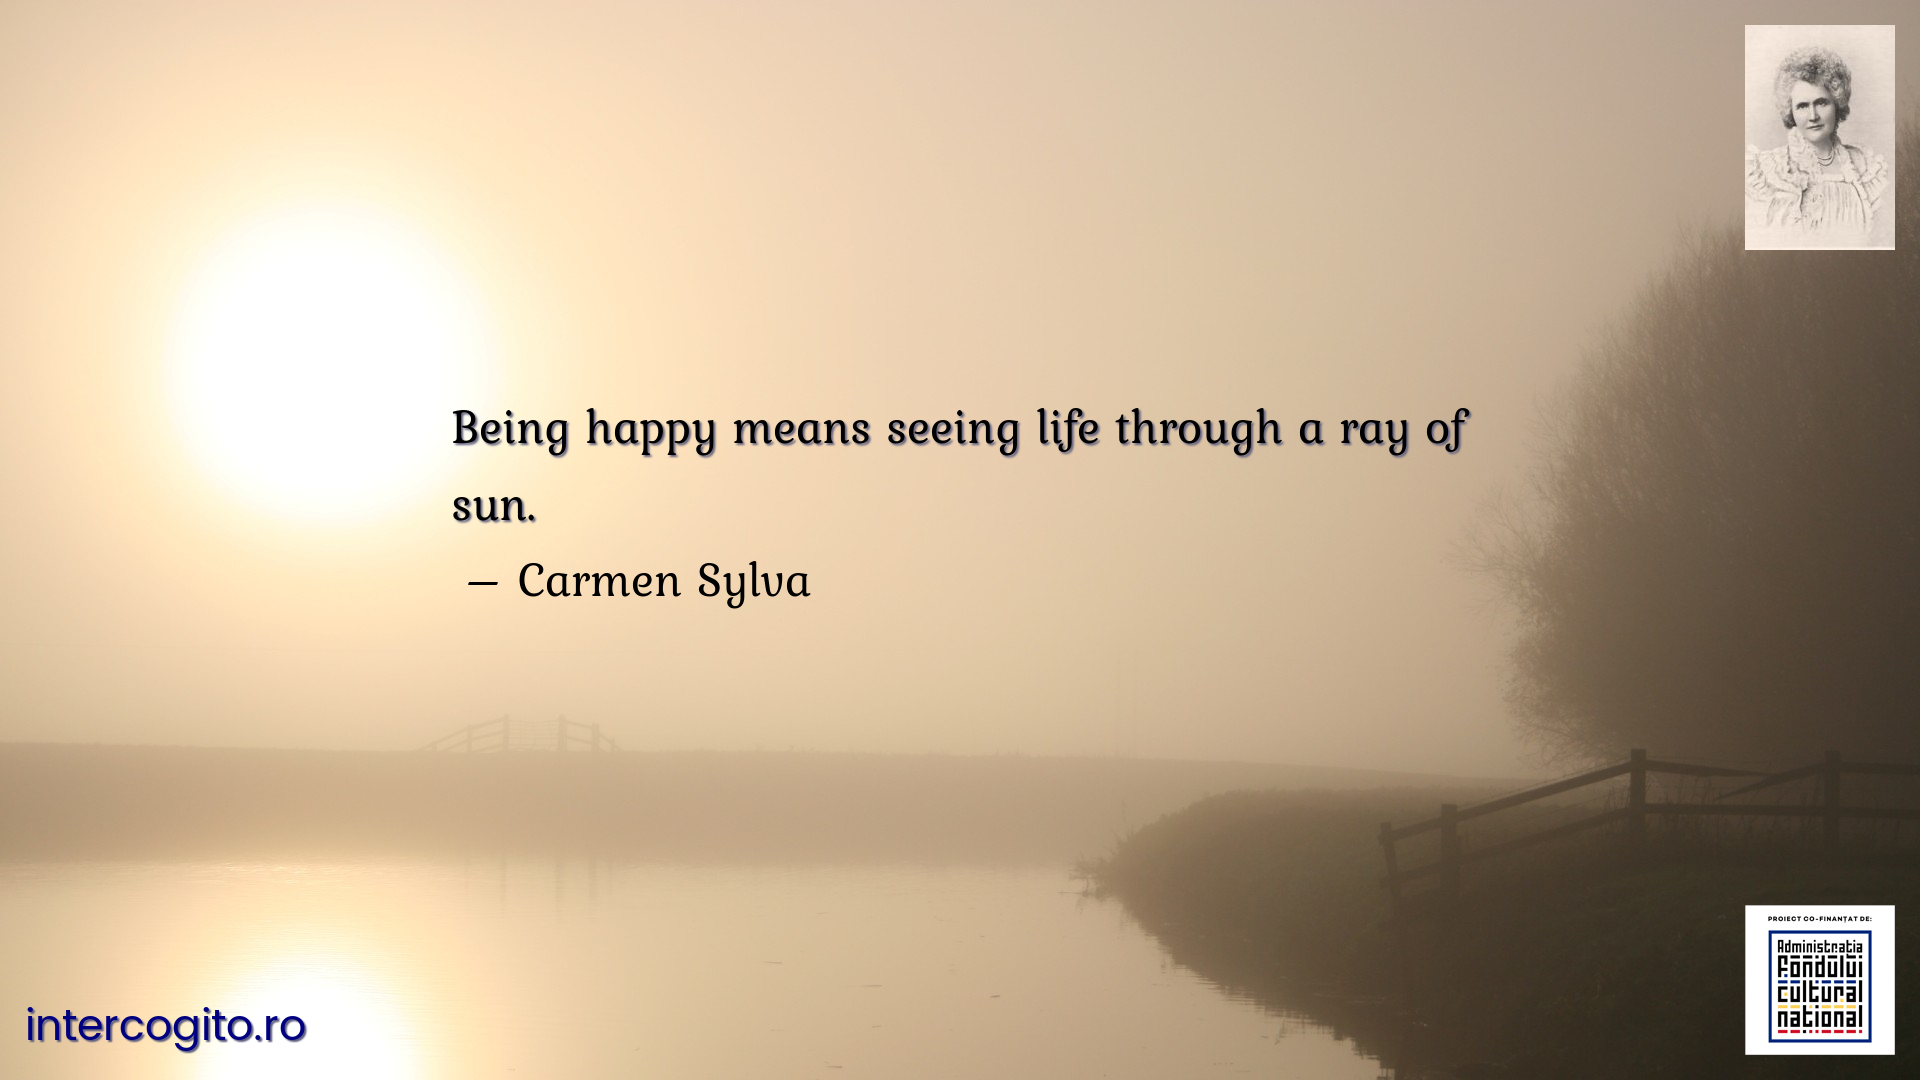 Being happy means seeing life through a ray of sun.